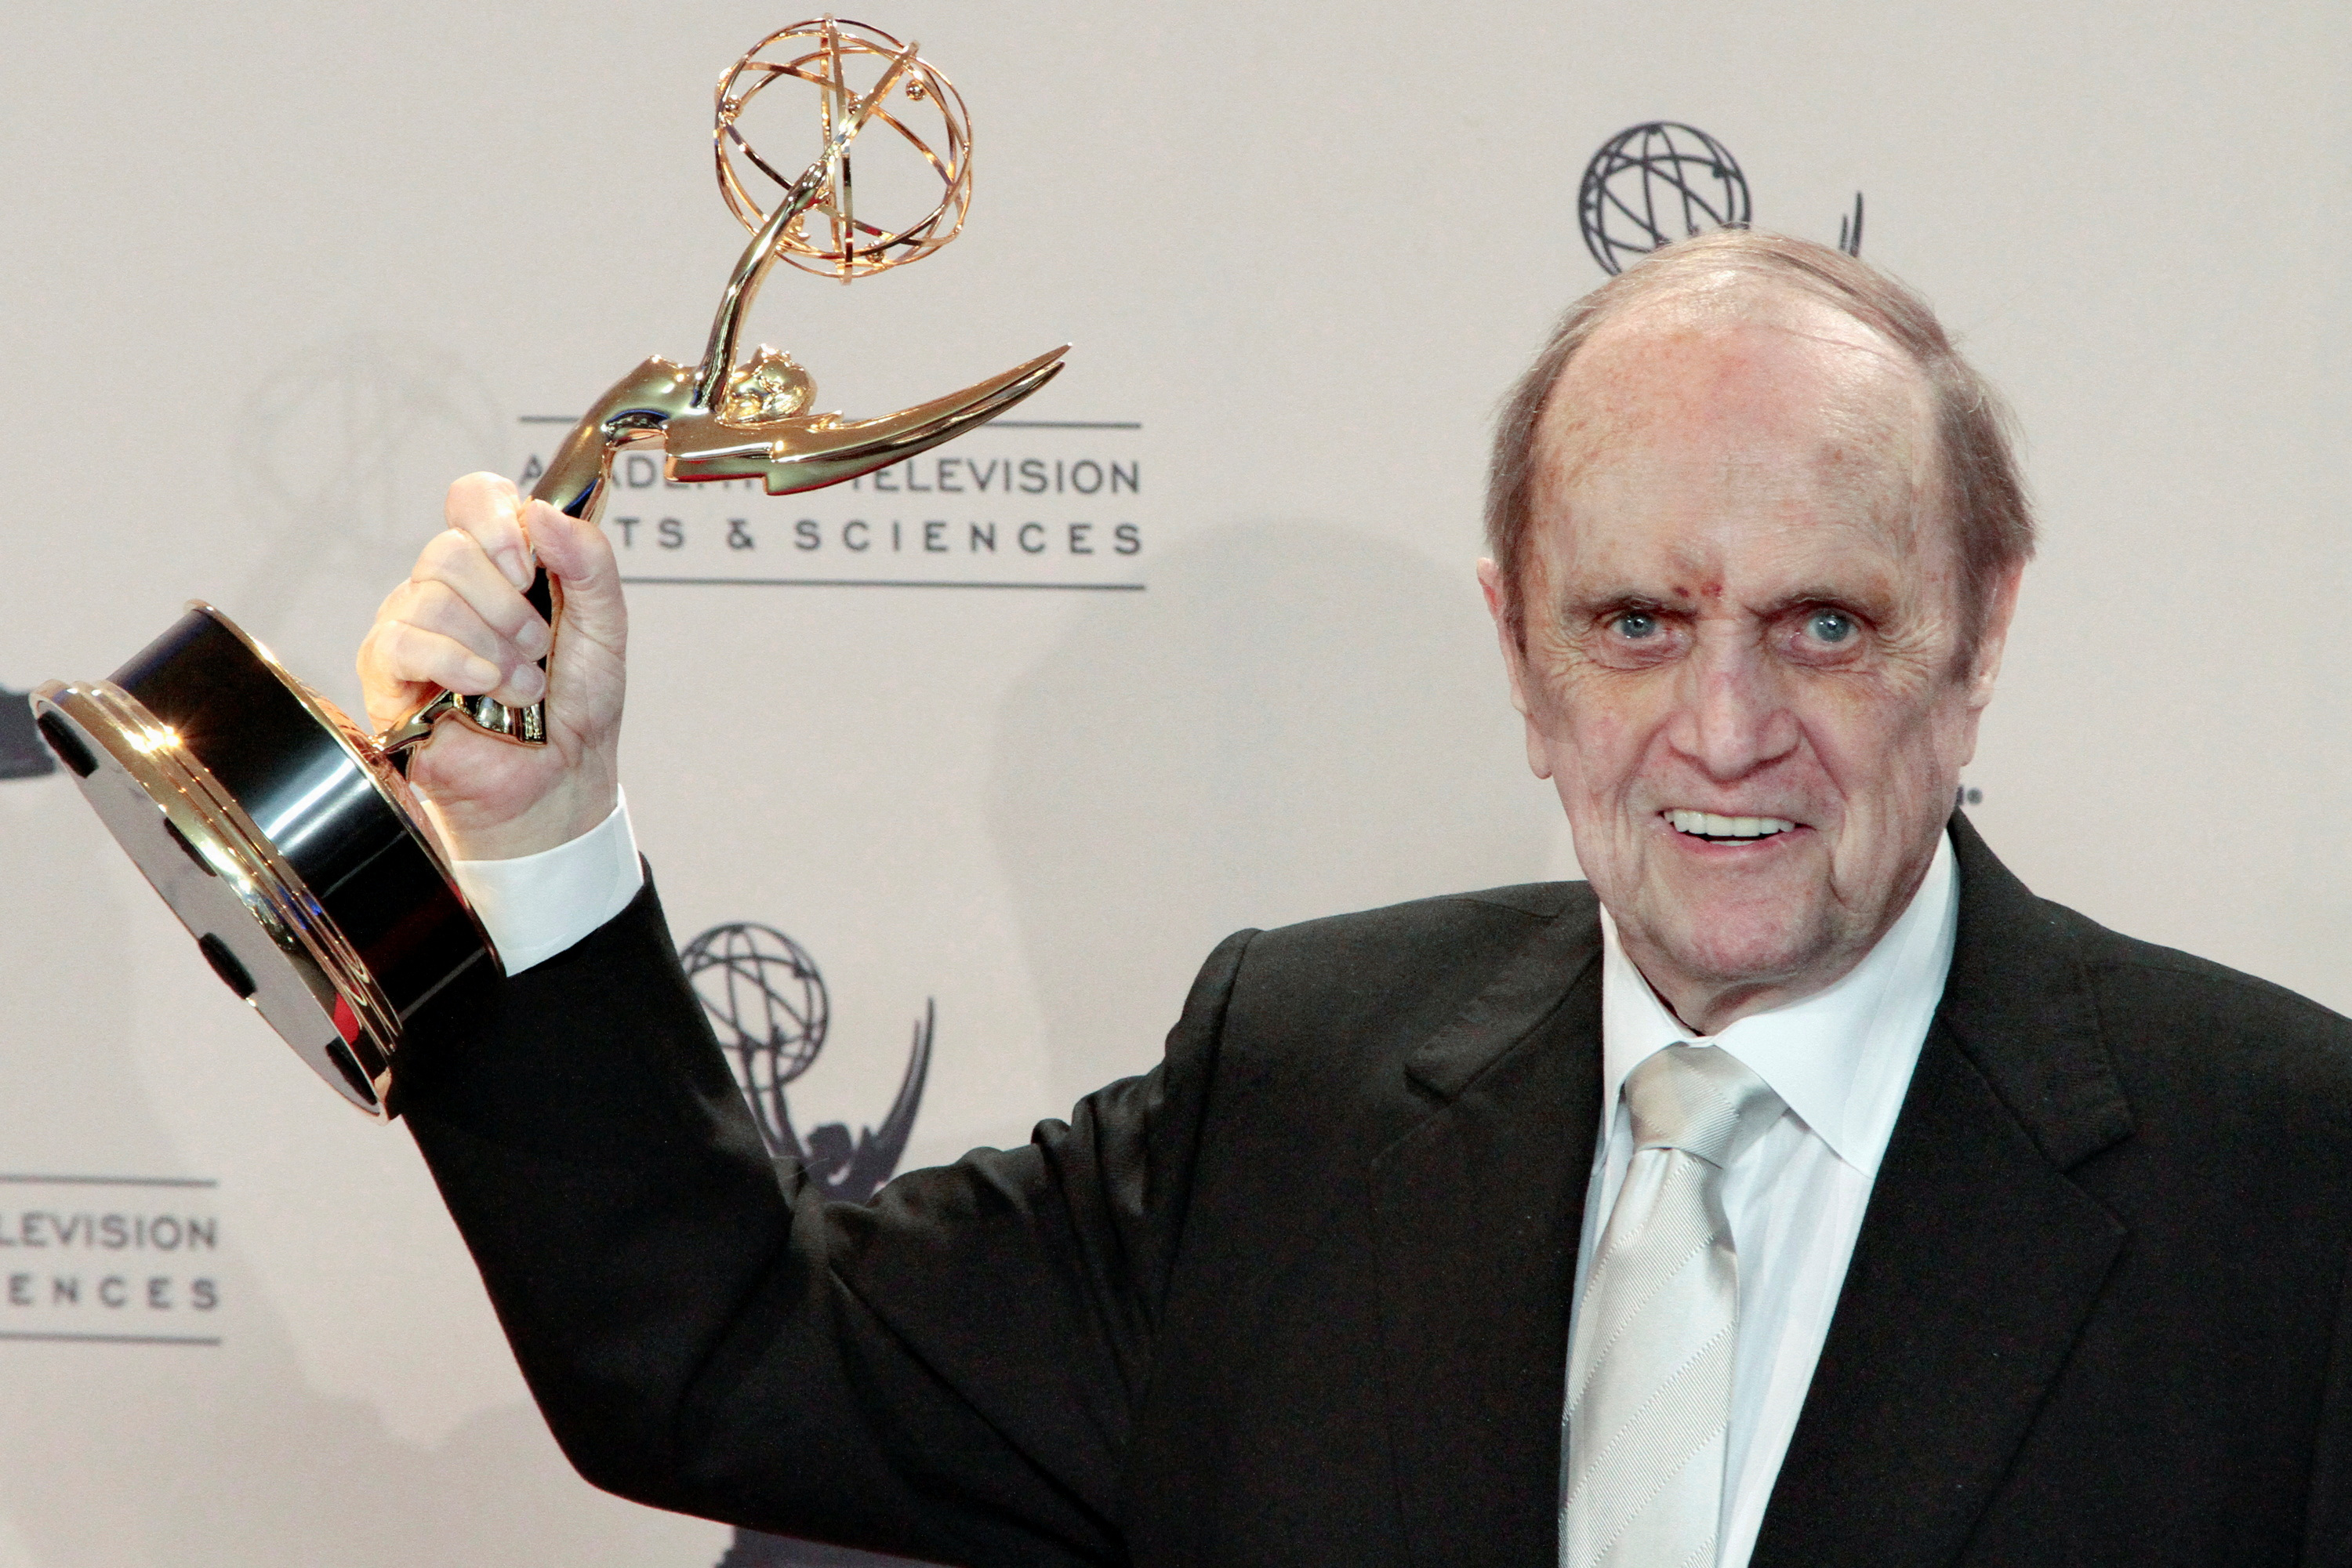 Bob Newhart at the 2013 Emmy Awards in Los Angeles, California, after he won for outstanding guest actor in a comedy series for The Big Bang Theory